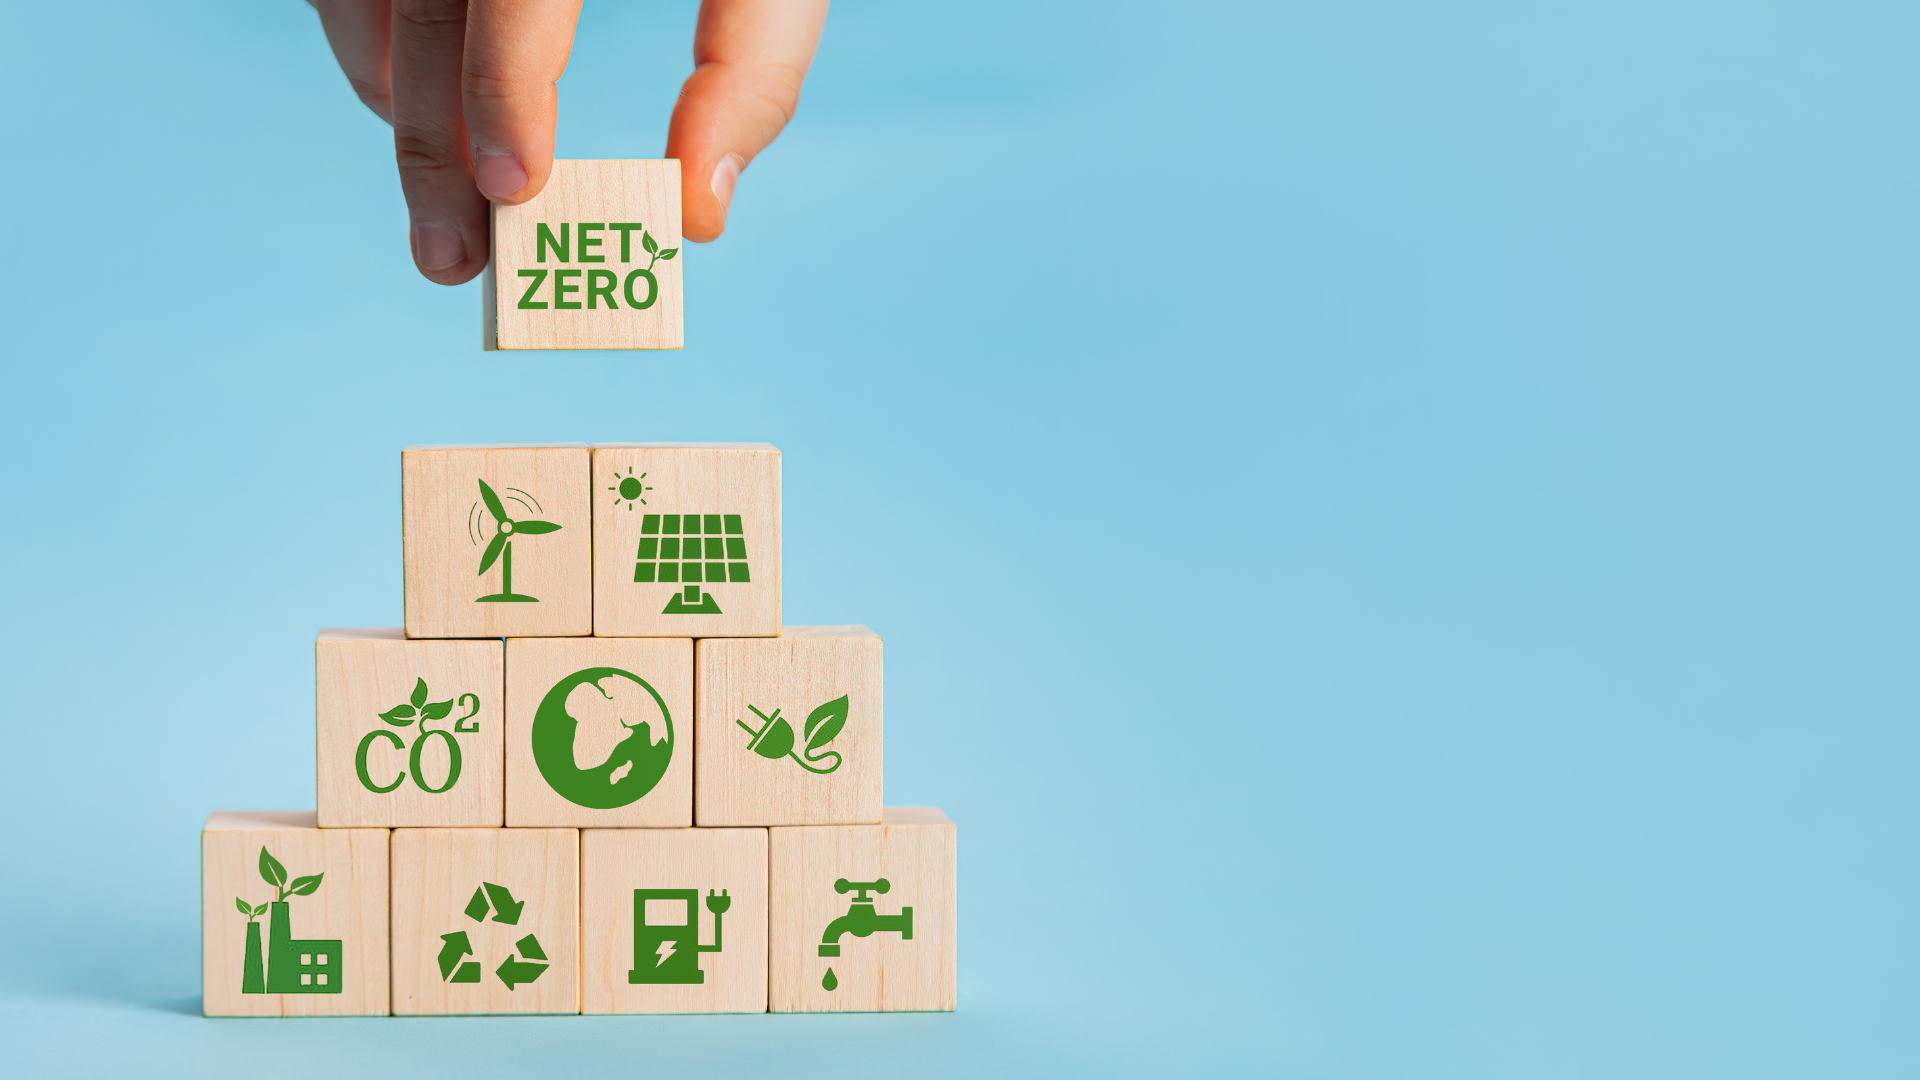 An image of 10 wooden blocks with the words net zero on one and then various sustainable graphics on the other blocks, including recycling, planting trees and others